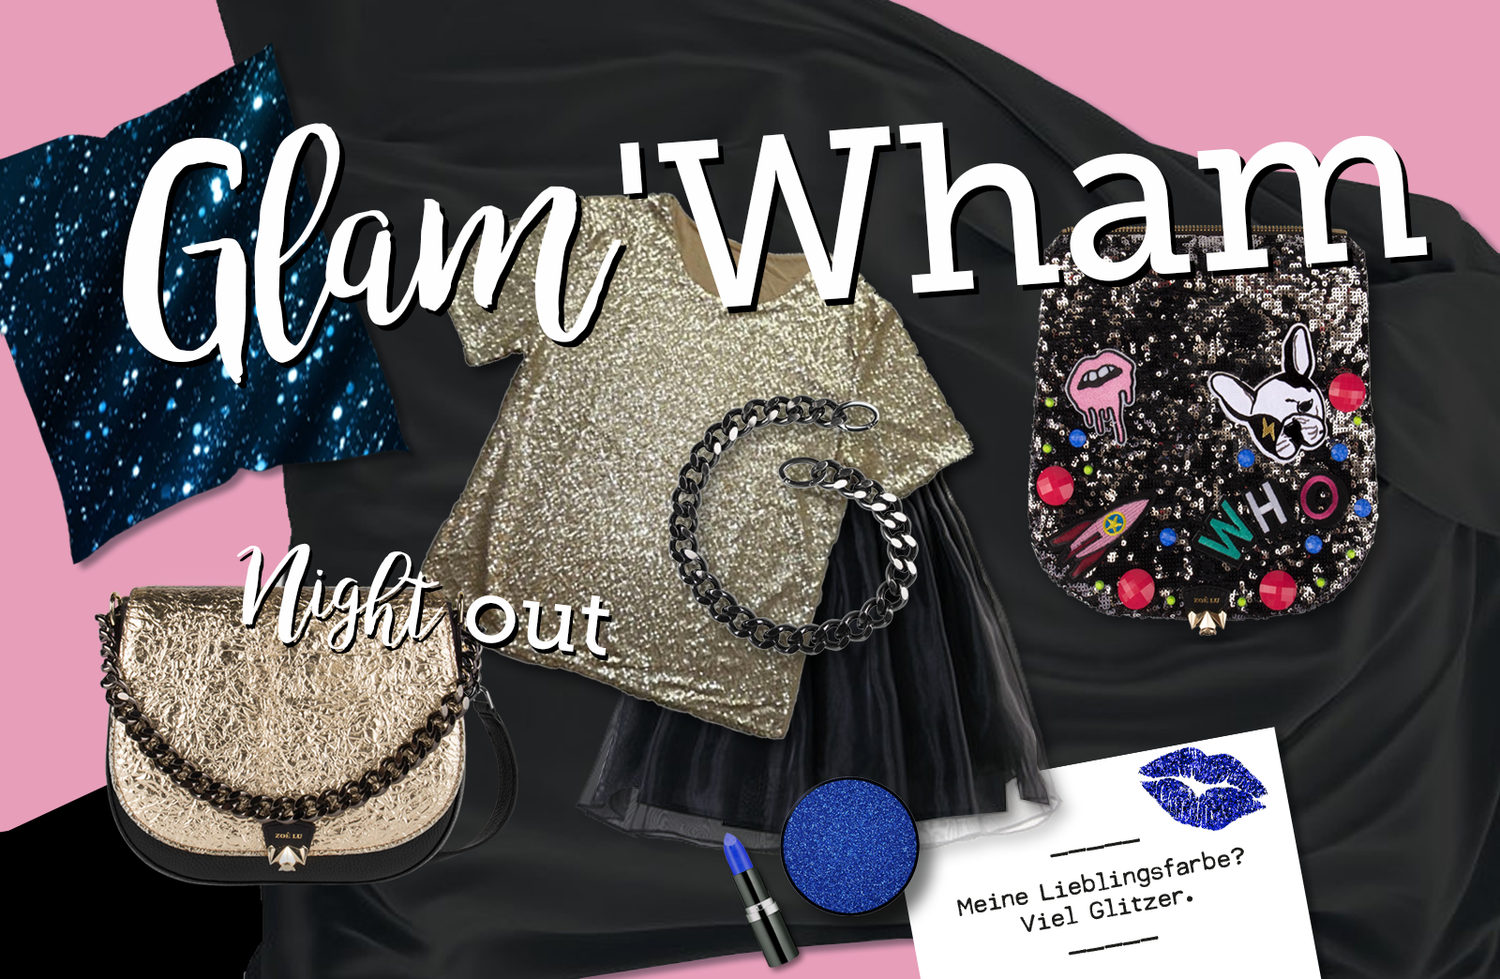 Wechselklappen Glam'Wham und Night out, Xmas, Glamour, Sylvester-Party, ZOÉ LU